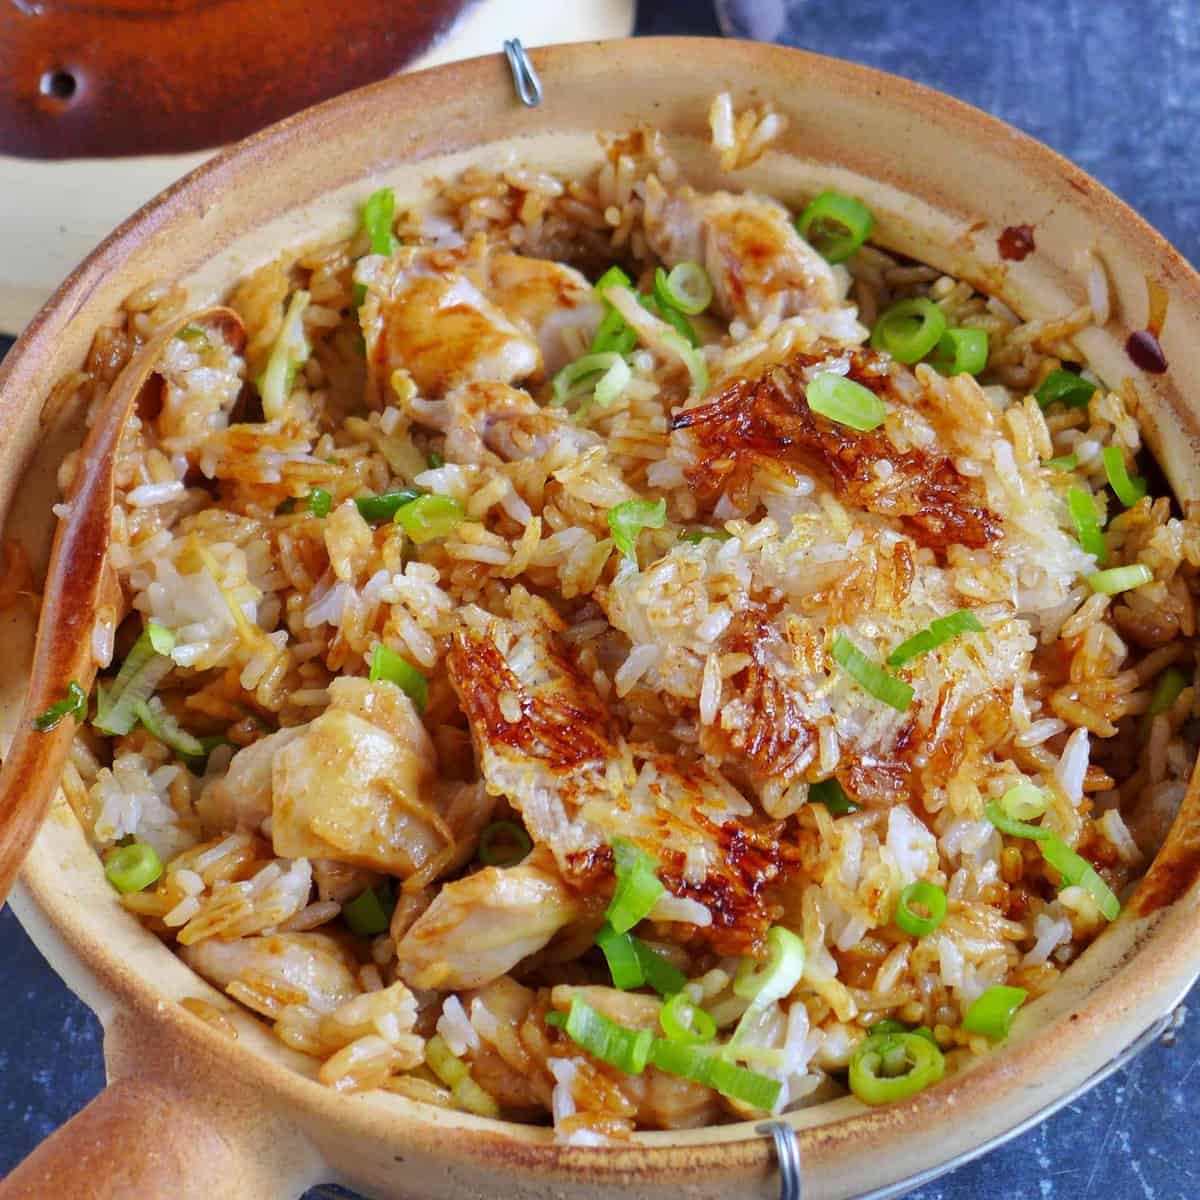 https://redhousespice.com/wp-content/uploads/2022/09/Mixed-clay-pot-rice.jpg